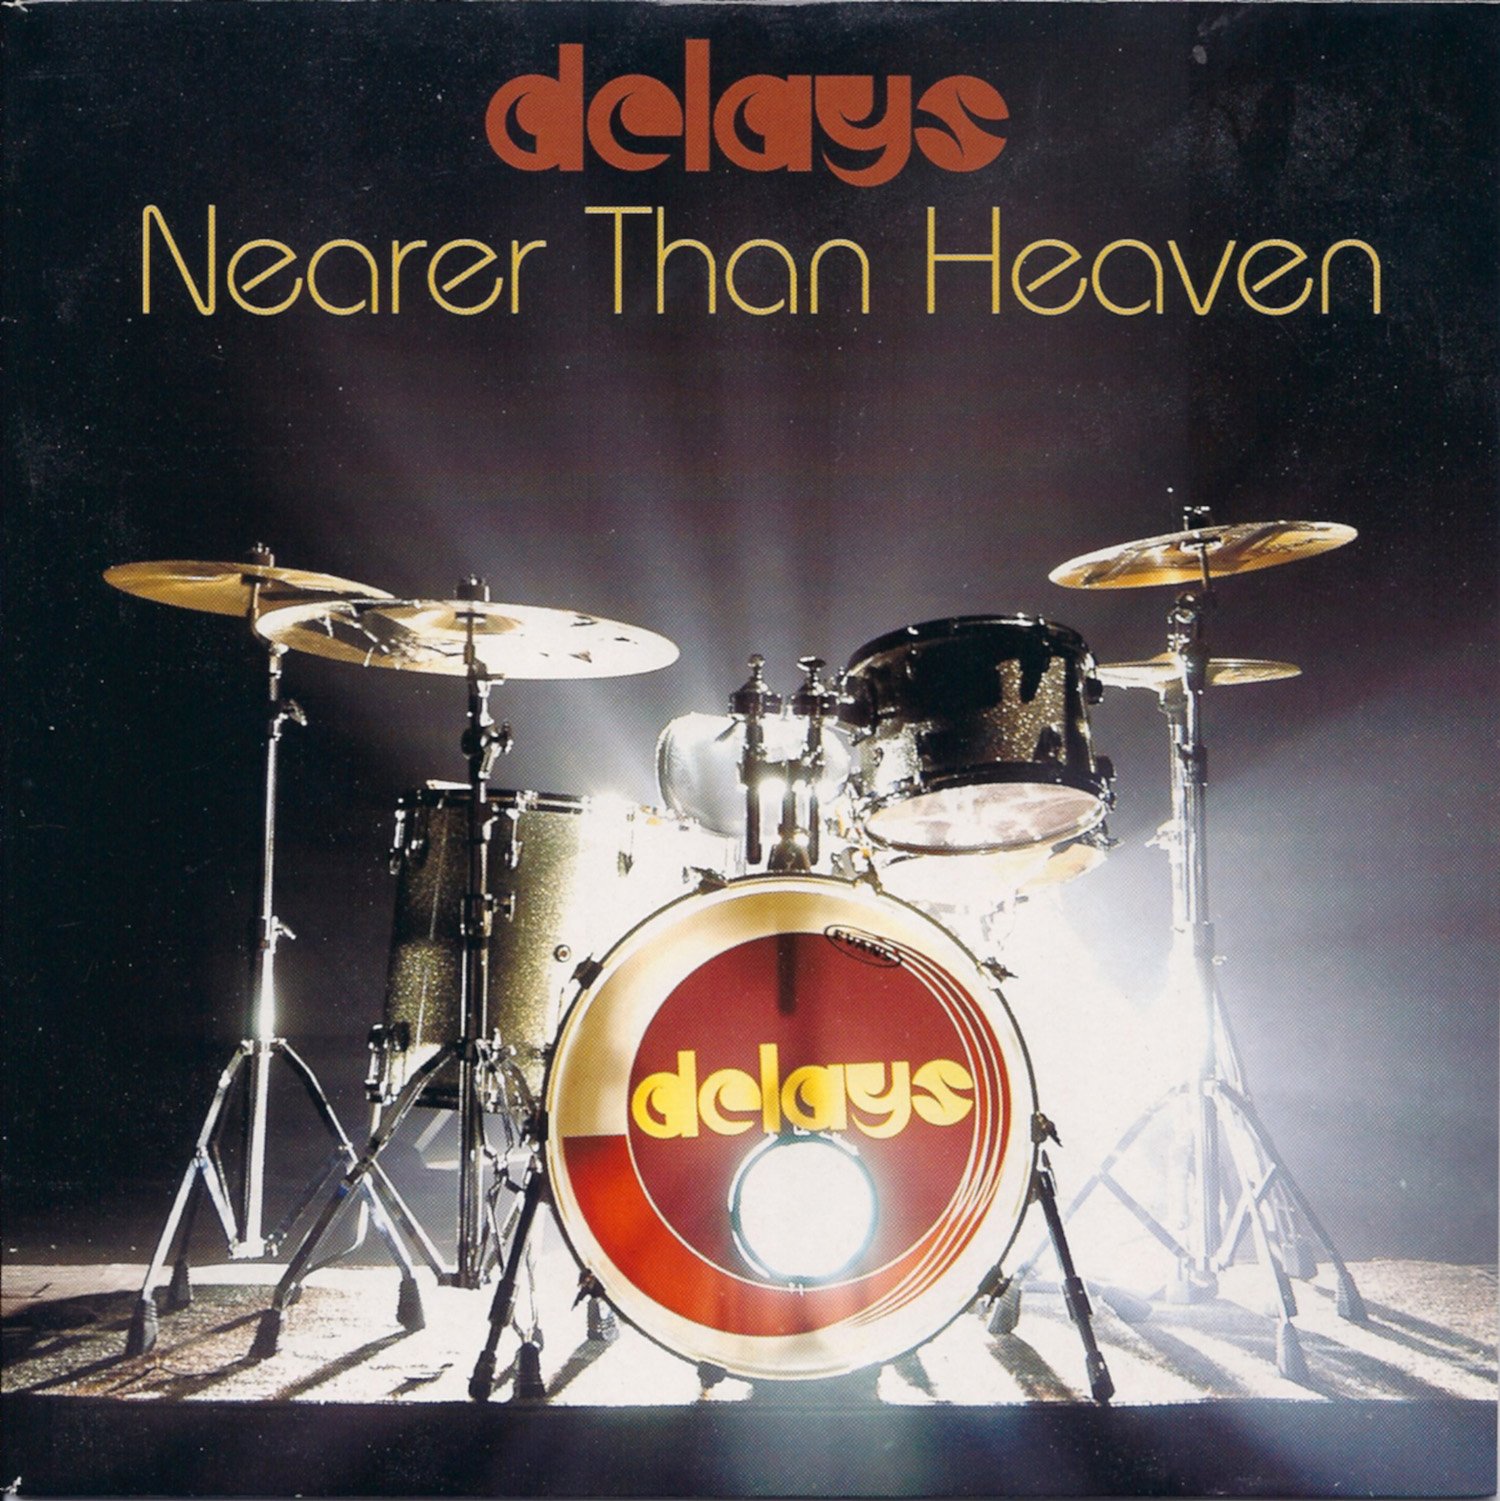 Delays / Neaer Than Heaven (7" single cover)